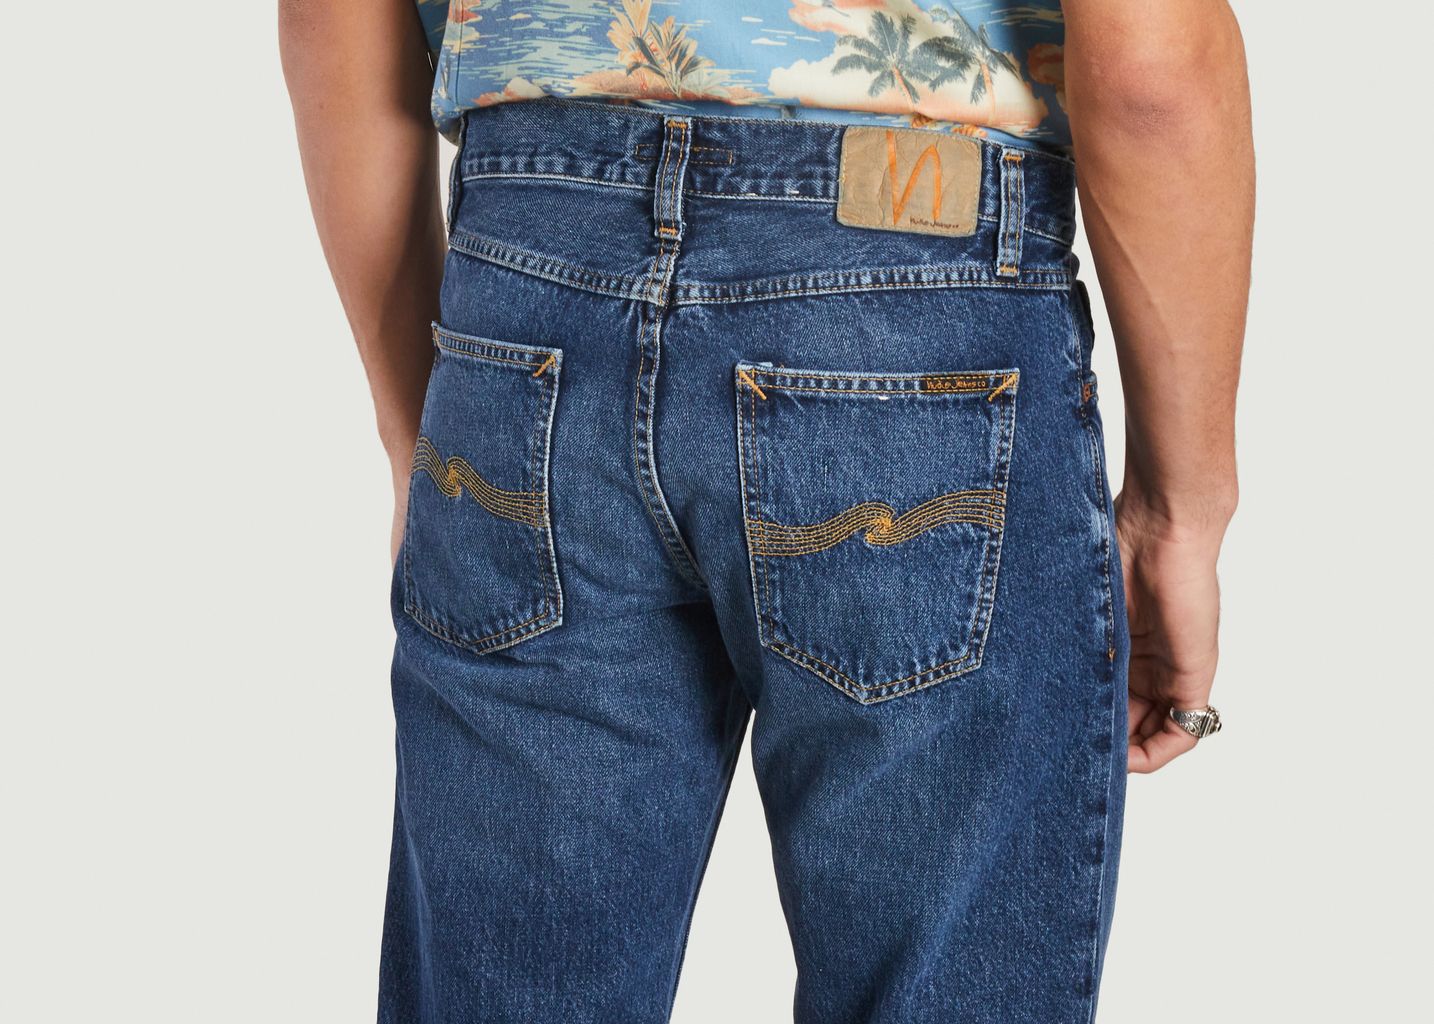 Gritty Jackson Regular Jeans - Nudie Jeans